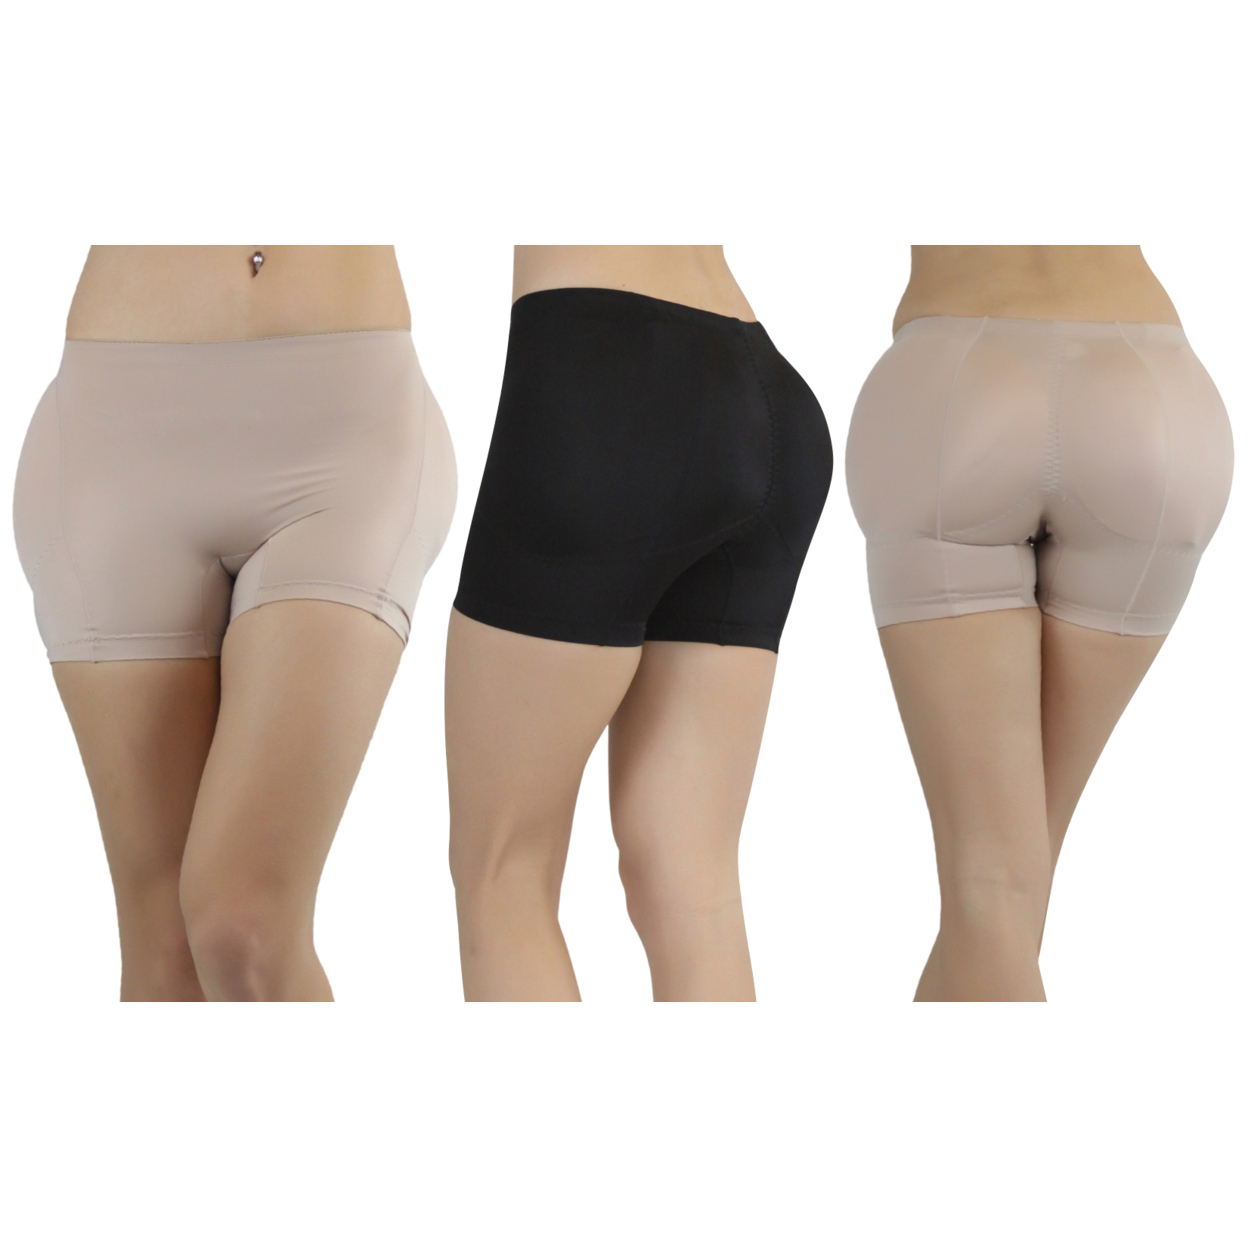 1 Or 2 Pack Of Women Butt And Hip Padded Shaper - Beige & Black, XL